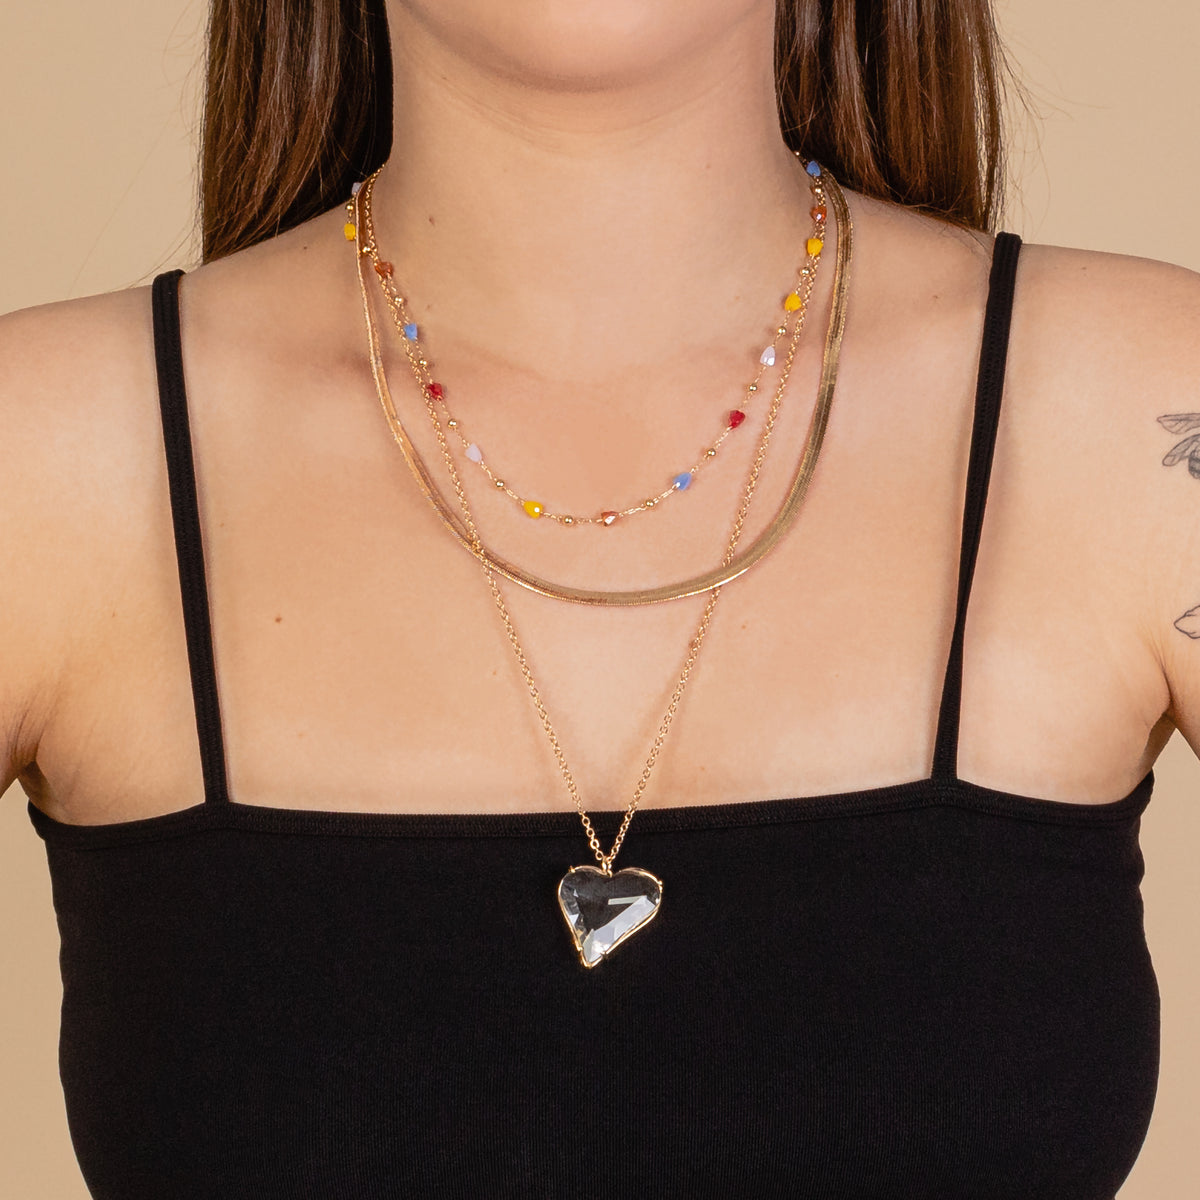 72951 - Layered Heart Necklace - Multi